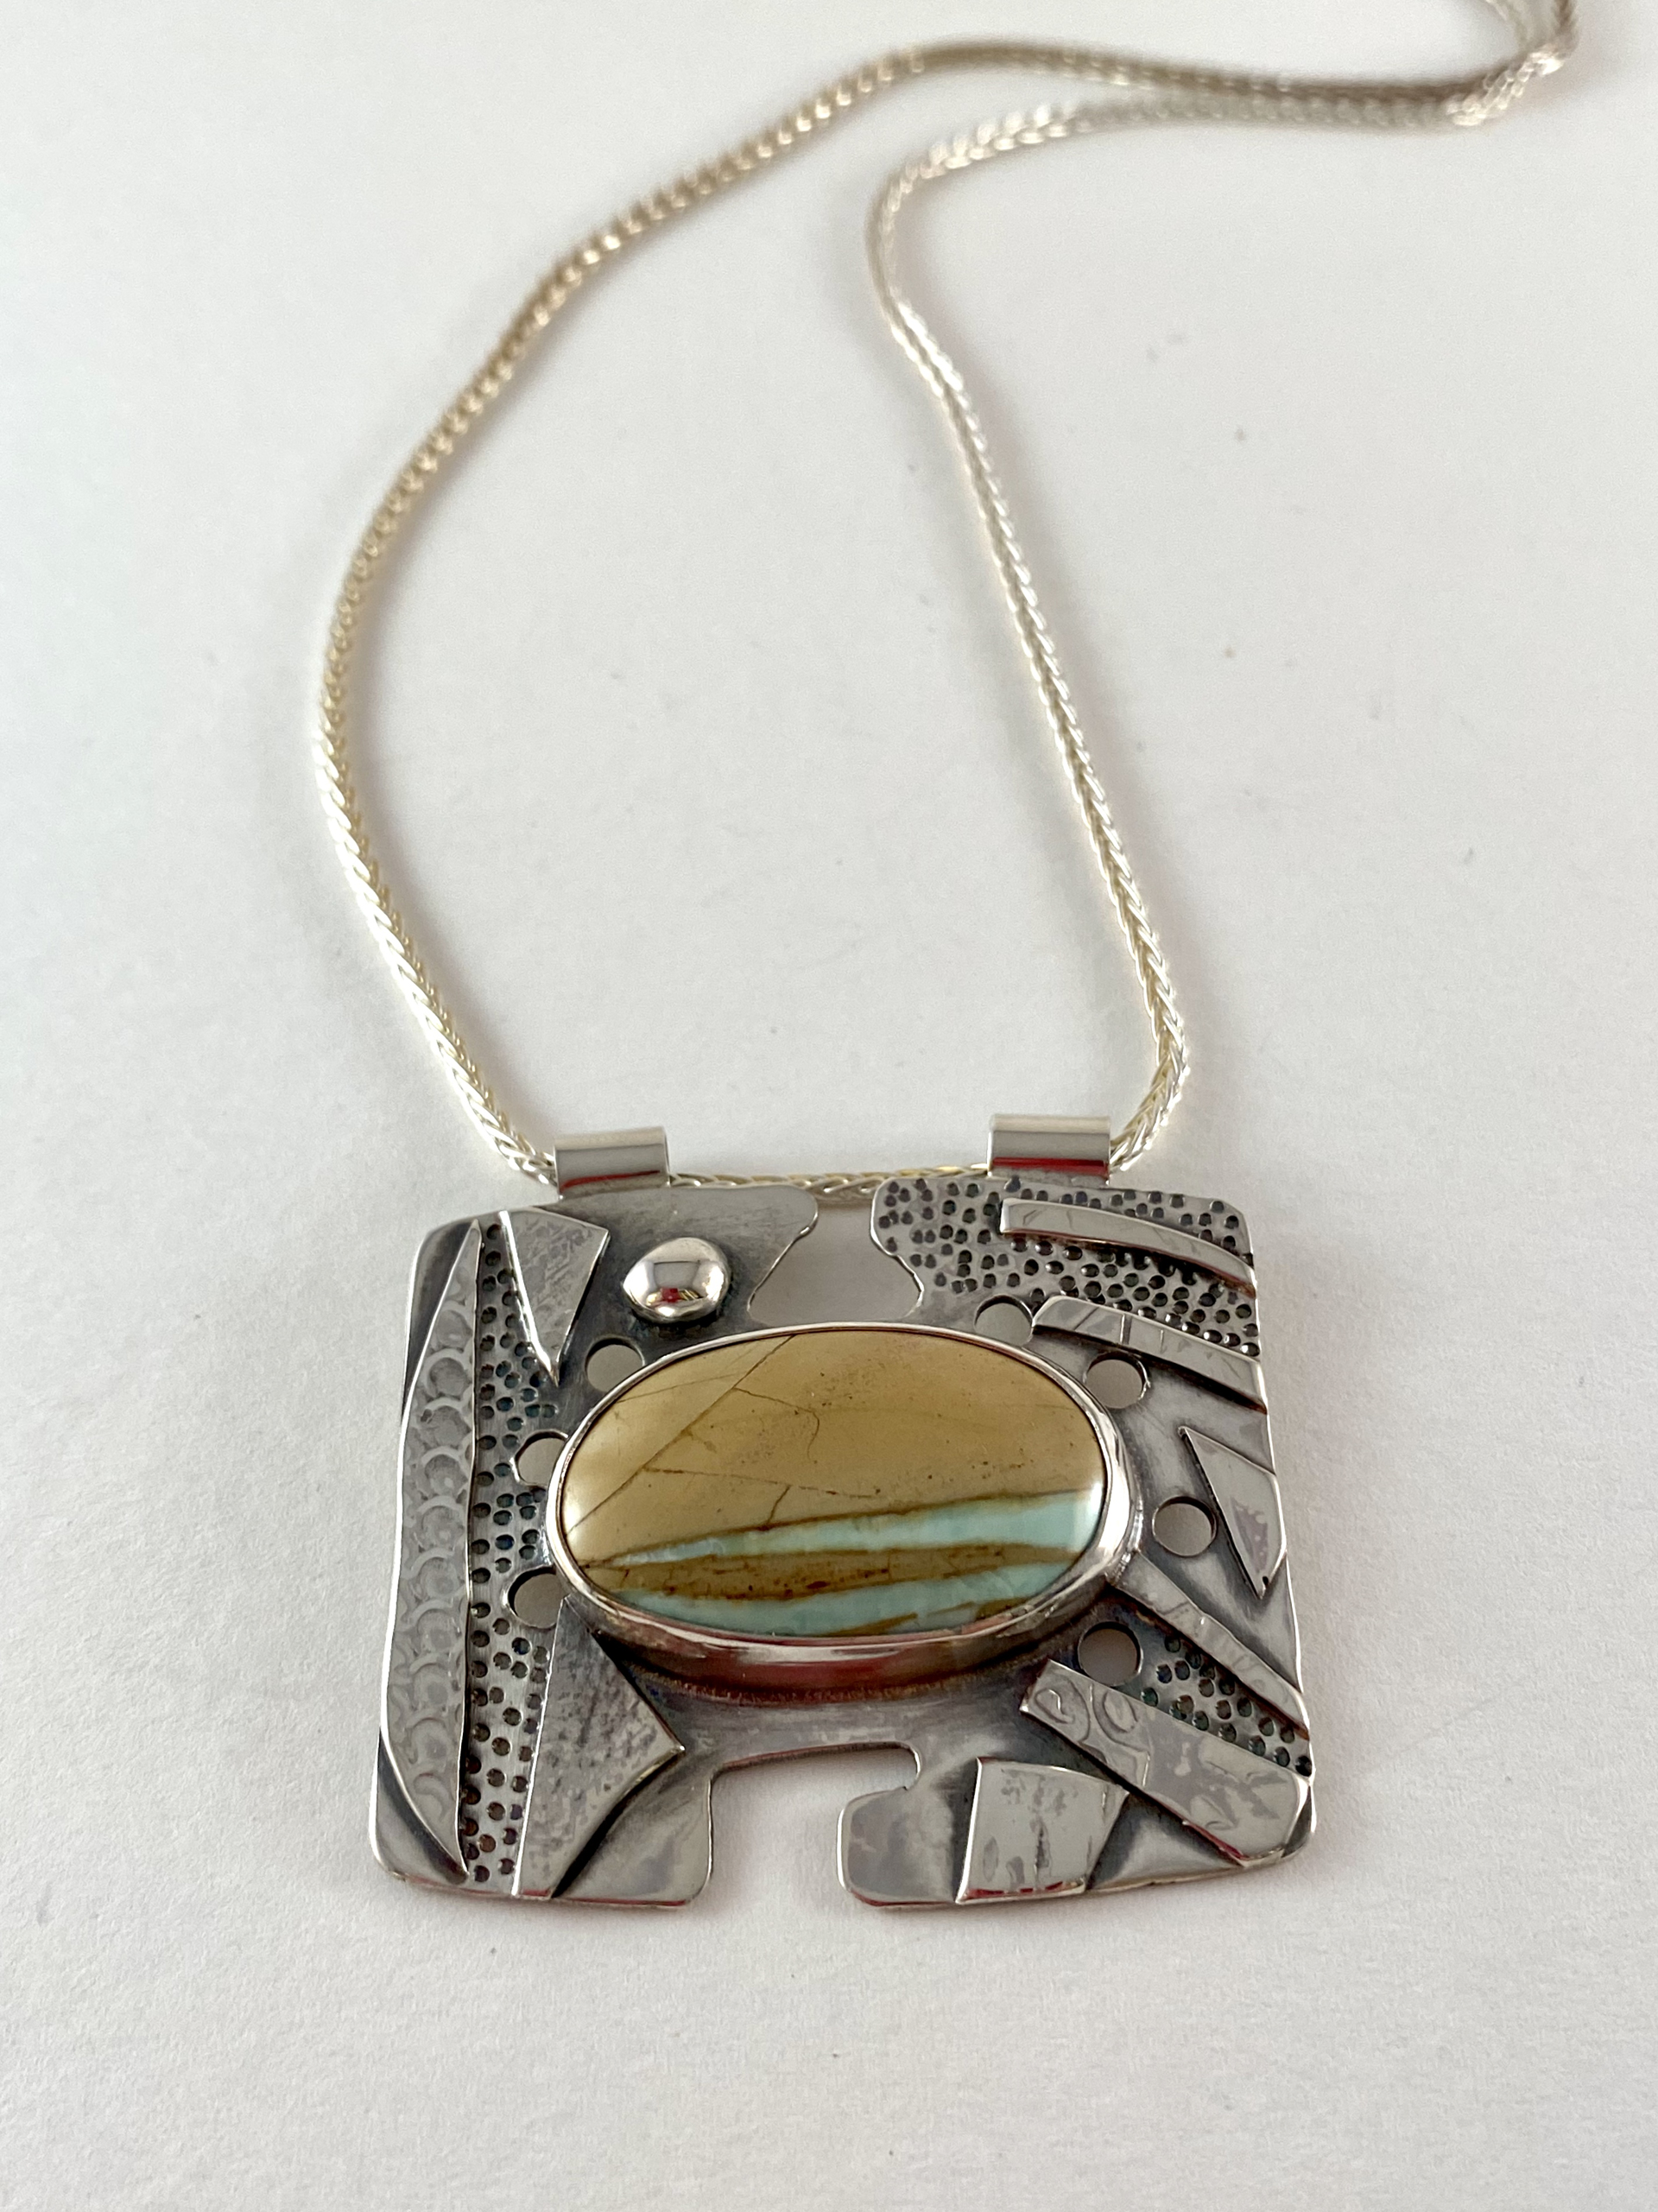 Patchwork Hand Textured Sterling Variscite Pendant, Silver18"Chain Necklace AB20-112 by Anne Bivens